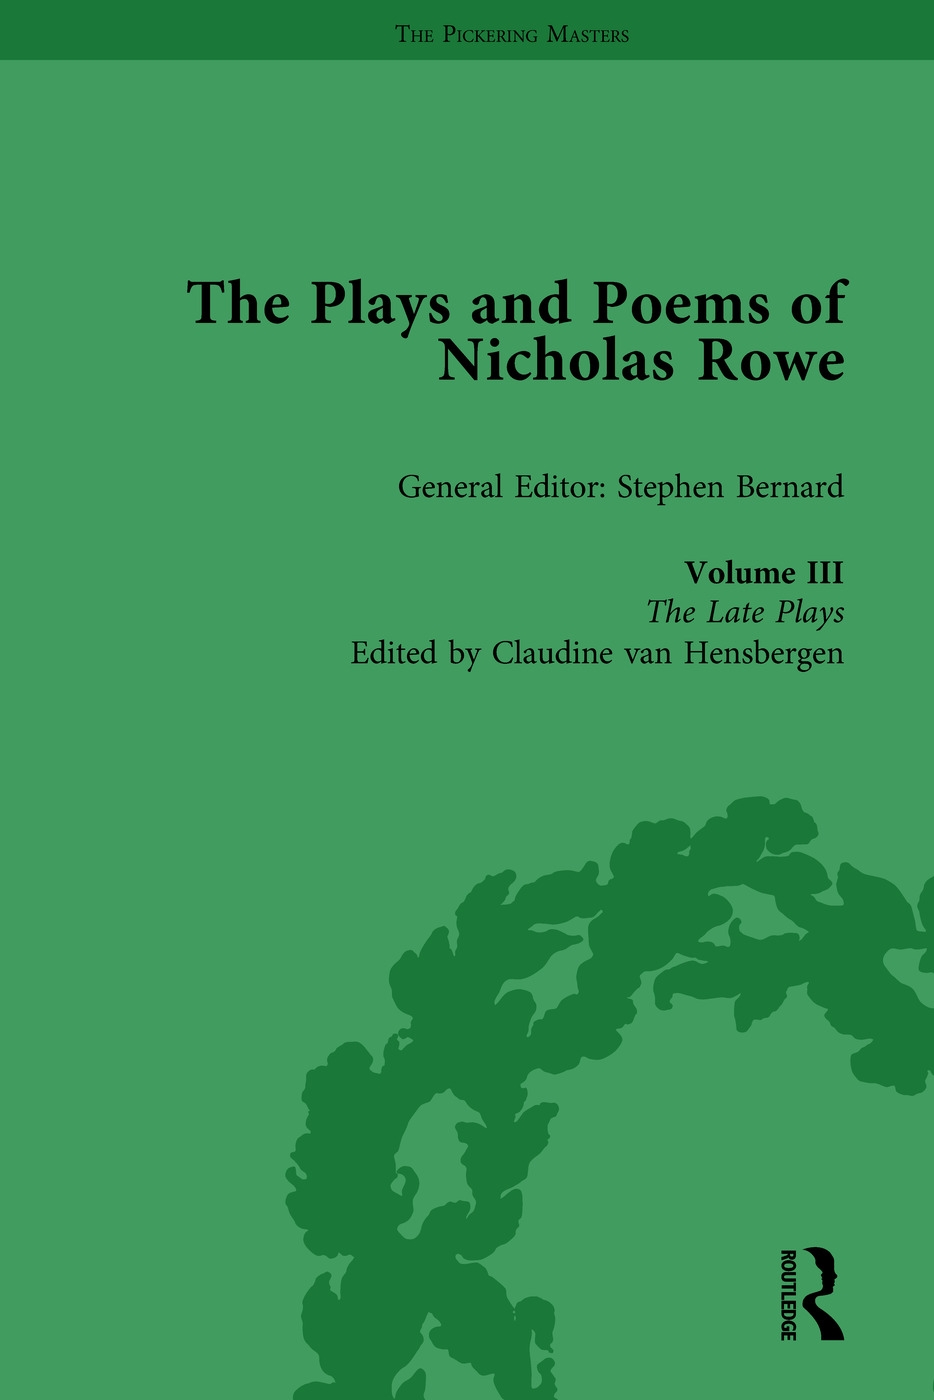 The Plays and Poems of Nicholas Rowe, Volume III: The Late Plays